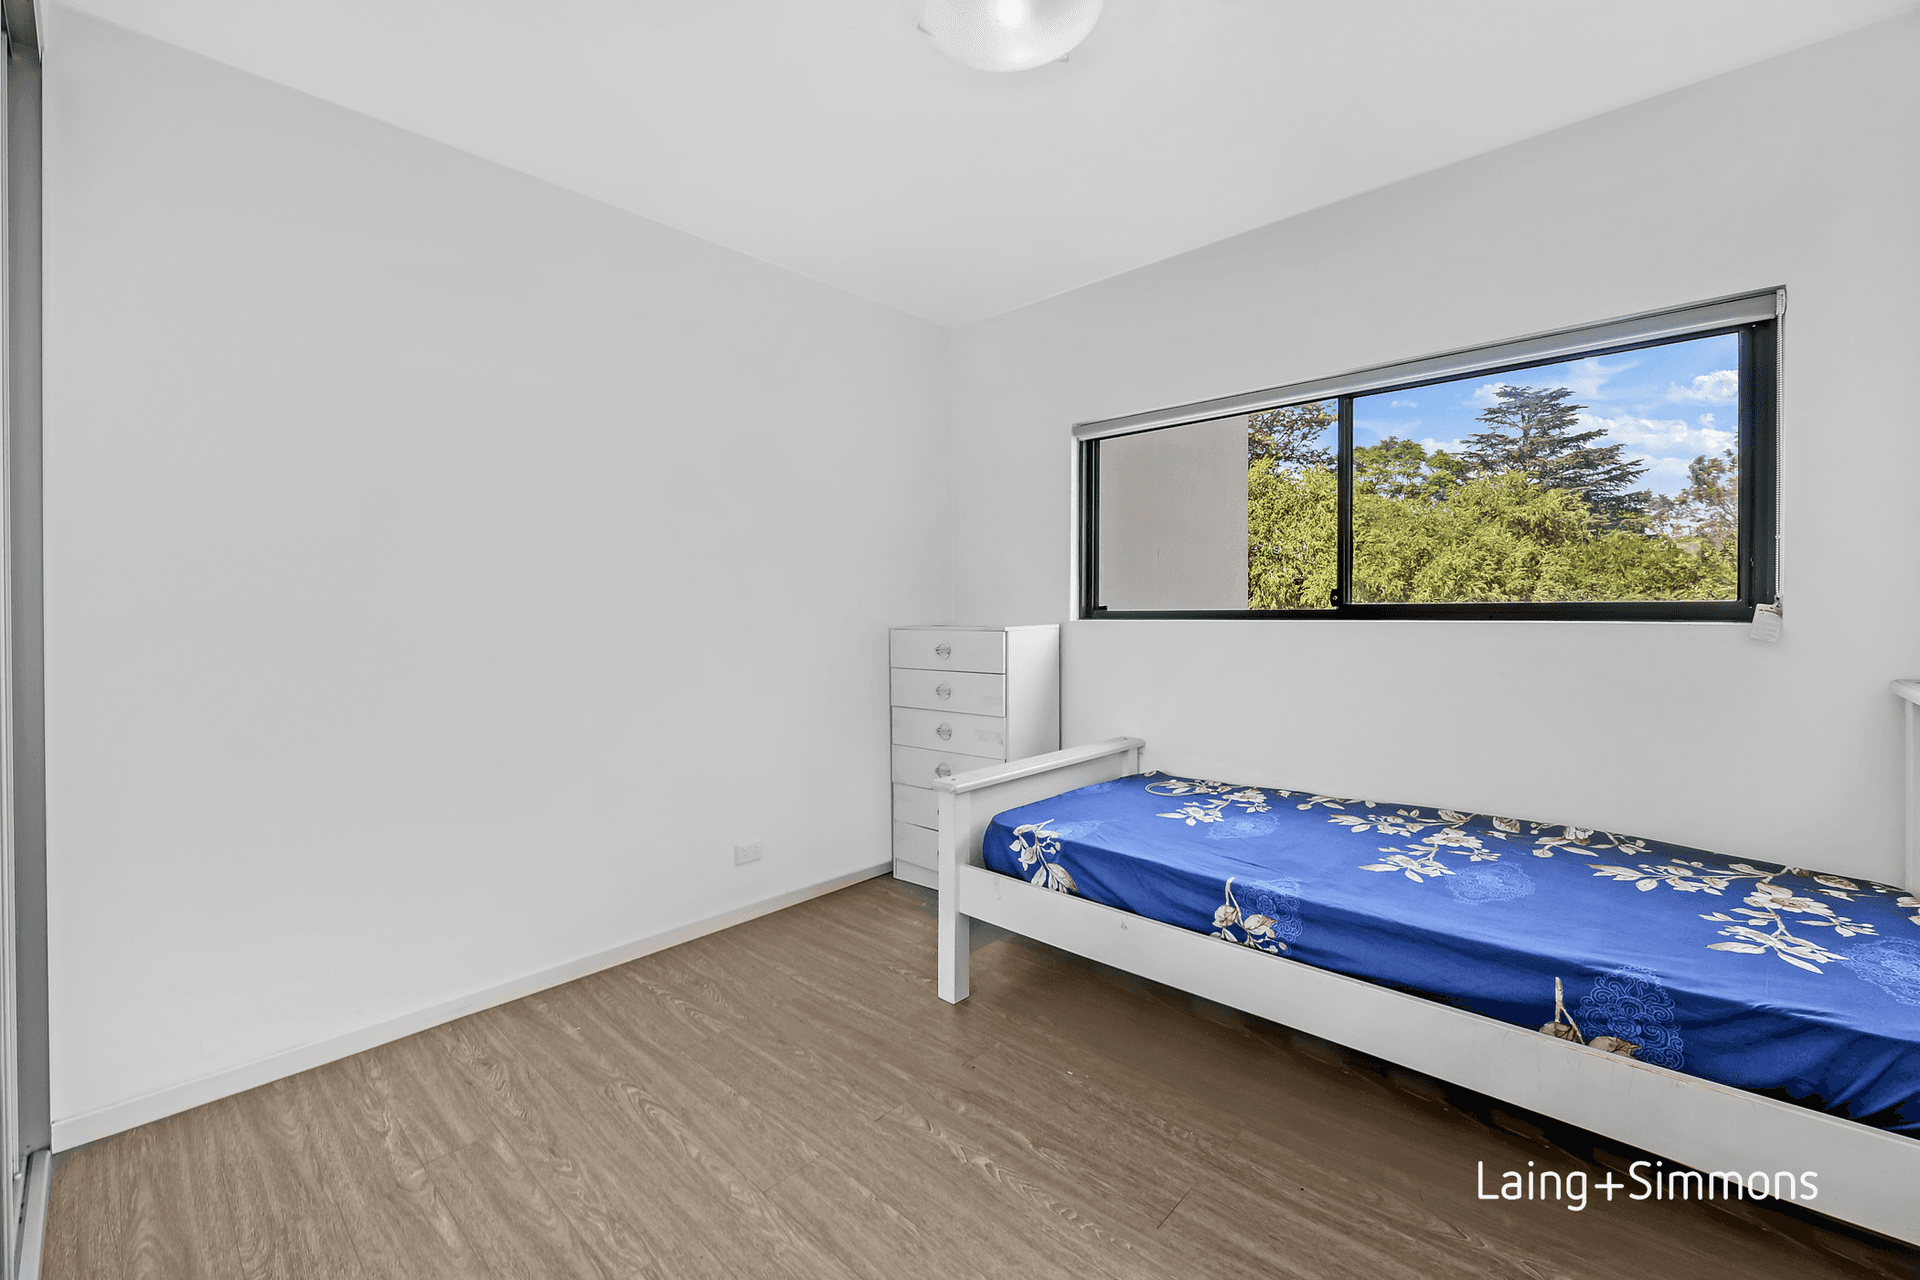 209/70-74 O'Neill Street, Guildford, NSW 2161